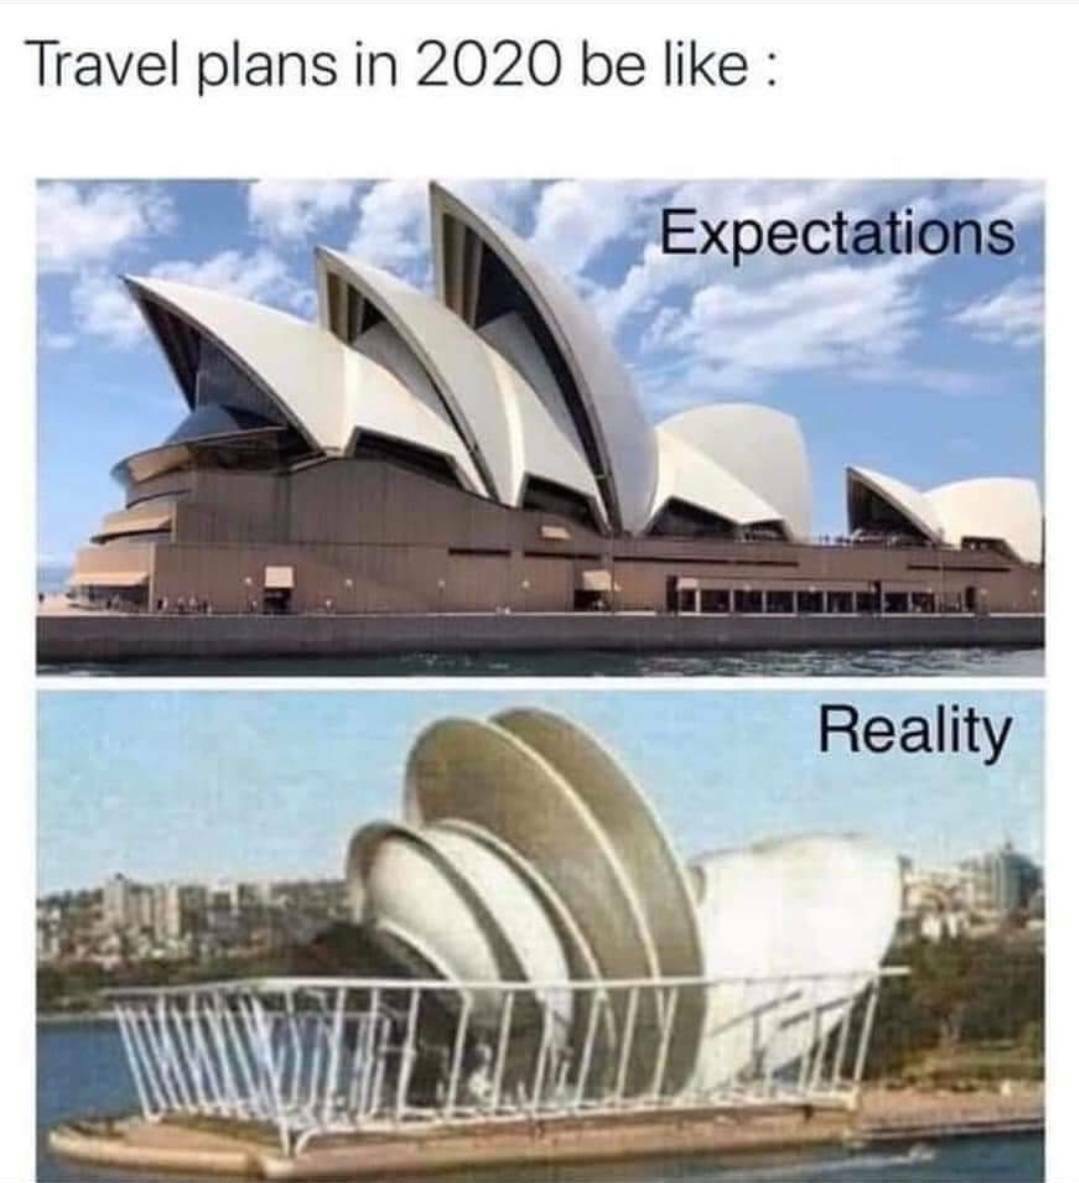 sydney opera house - Travel plans in 2020 be Expectations Reality